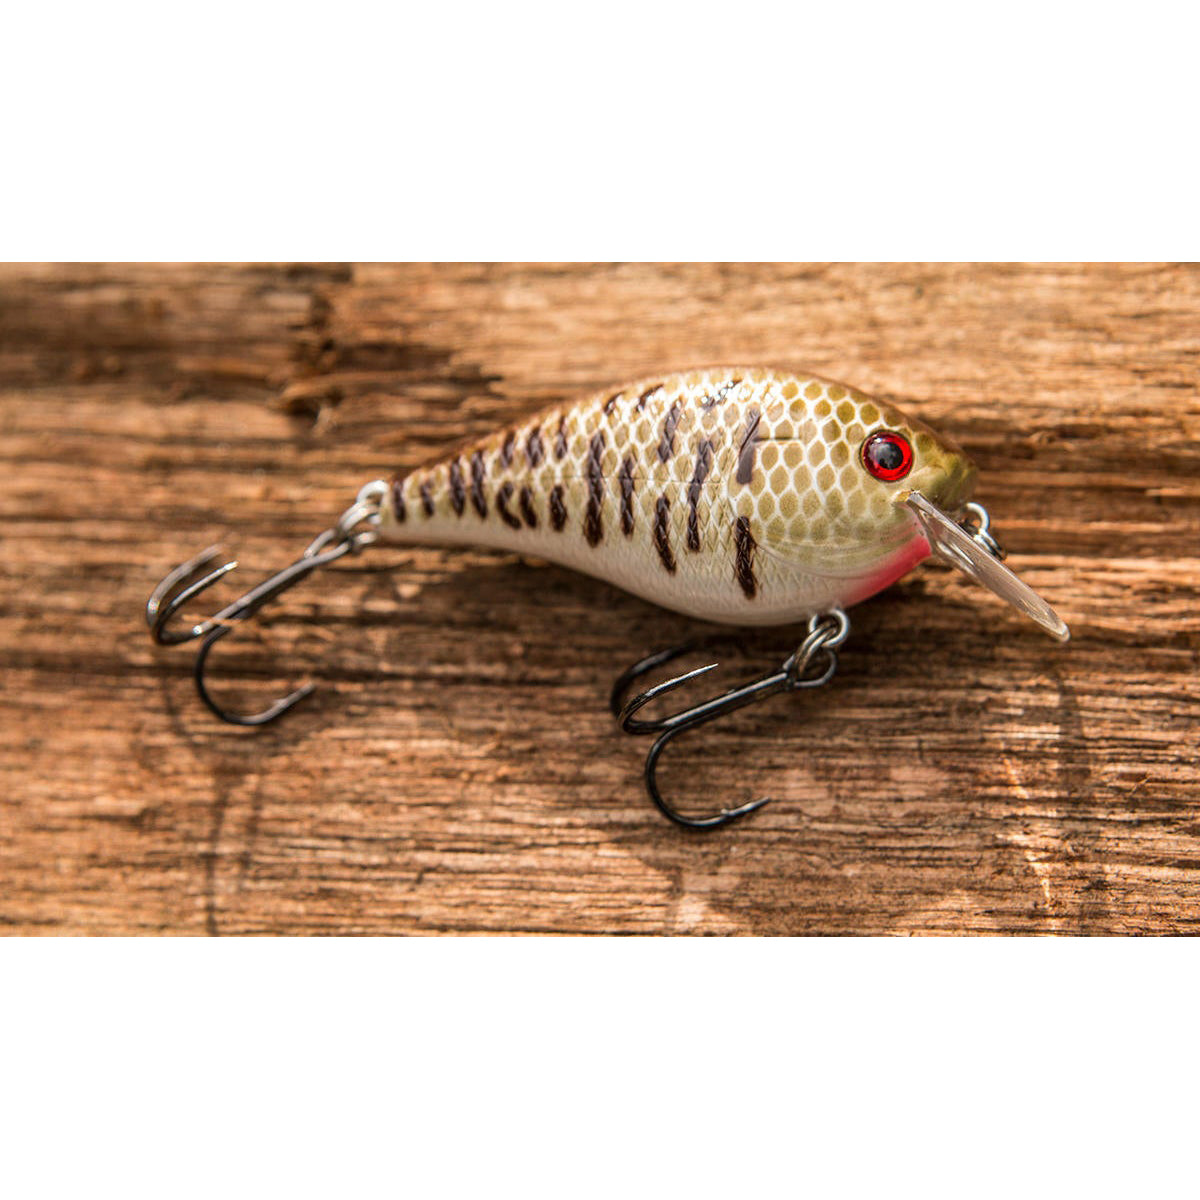 Bomber Fat Free Fingerling 3/8 oz Fishing Lure - Tennessee Shad Bomber Lures